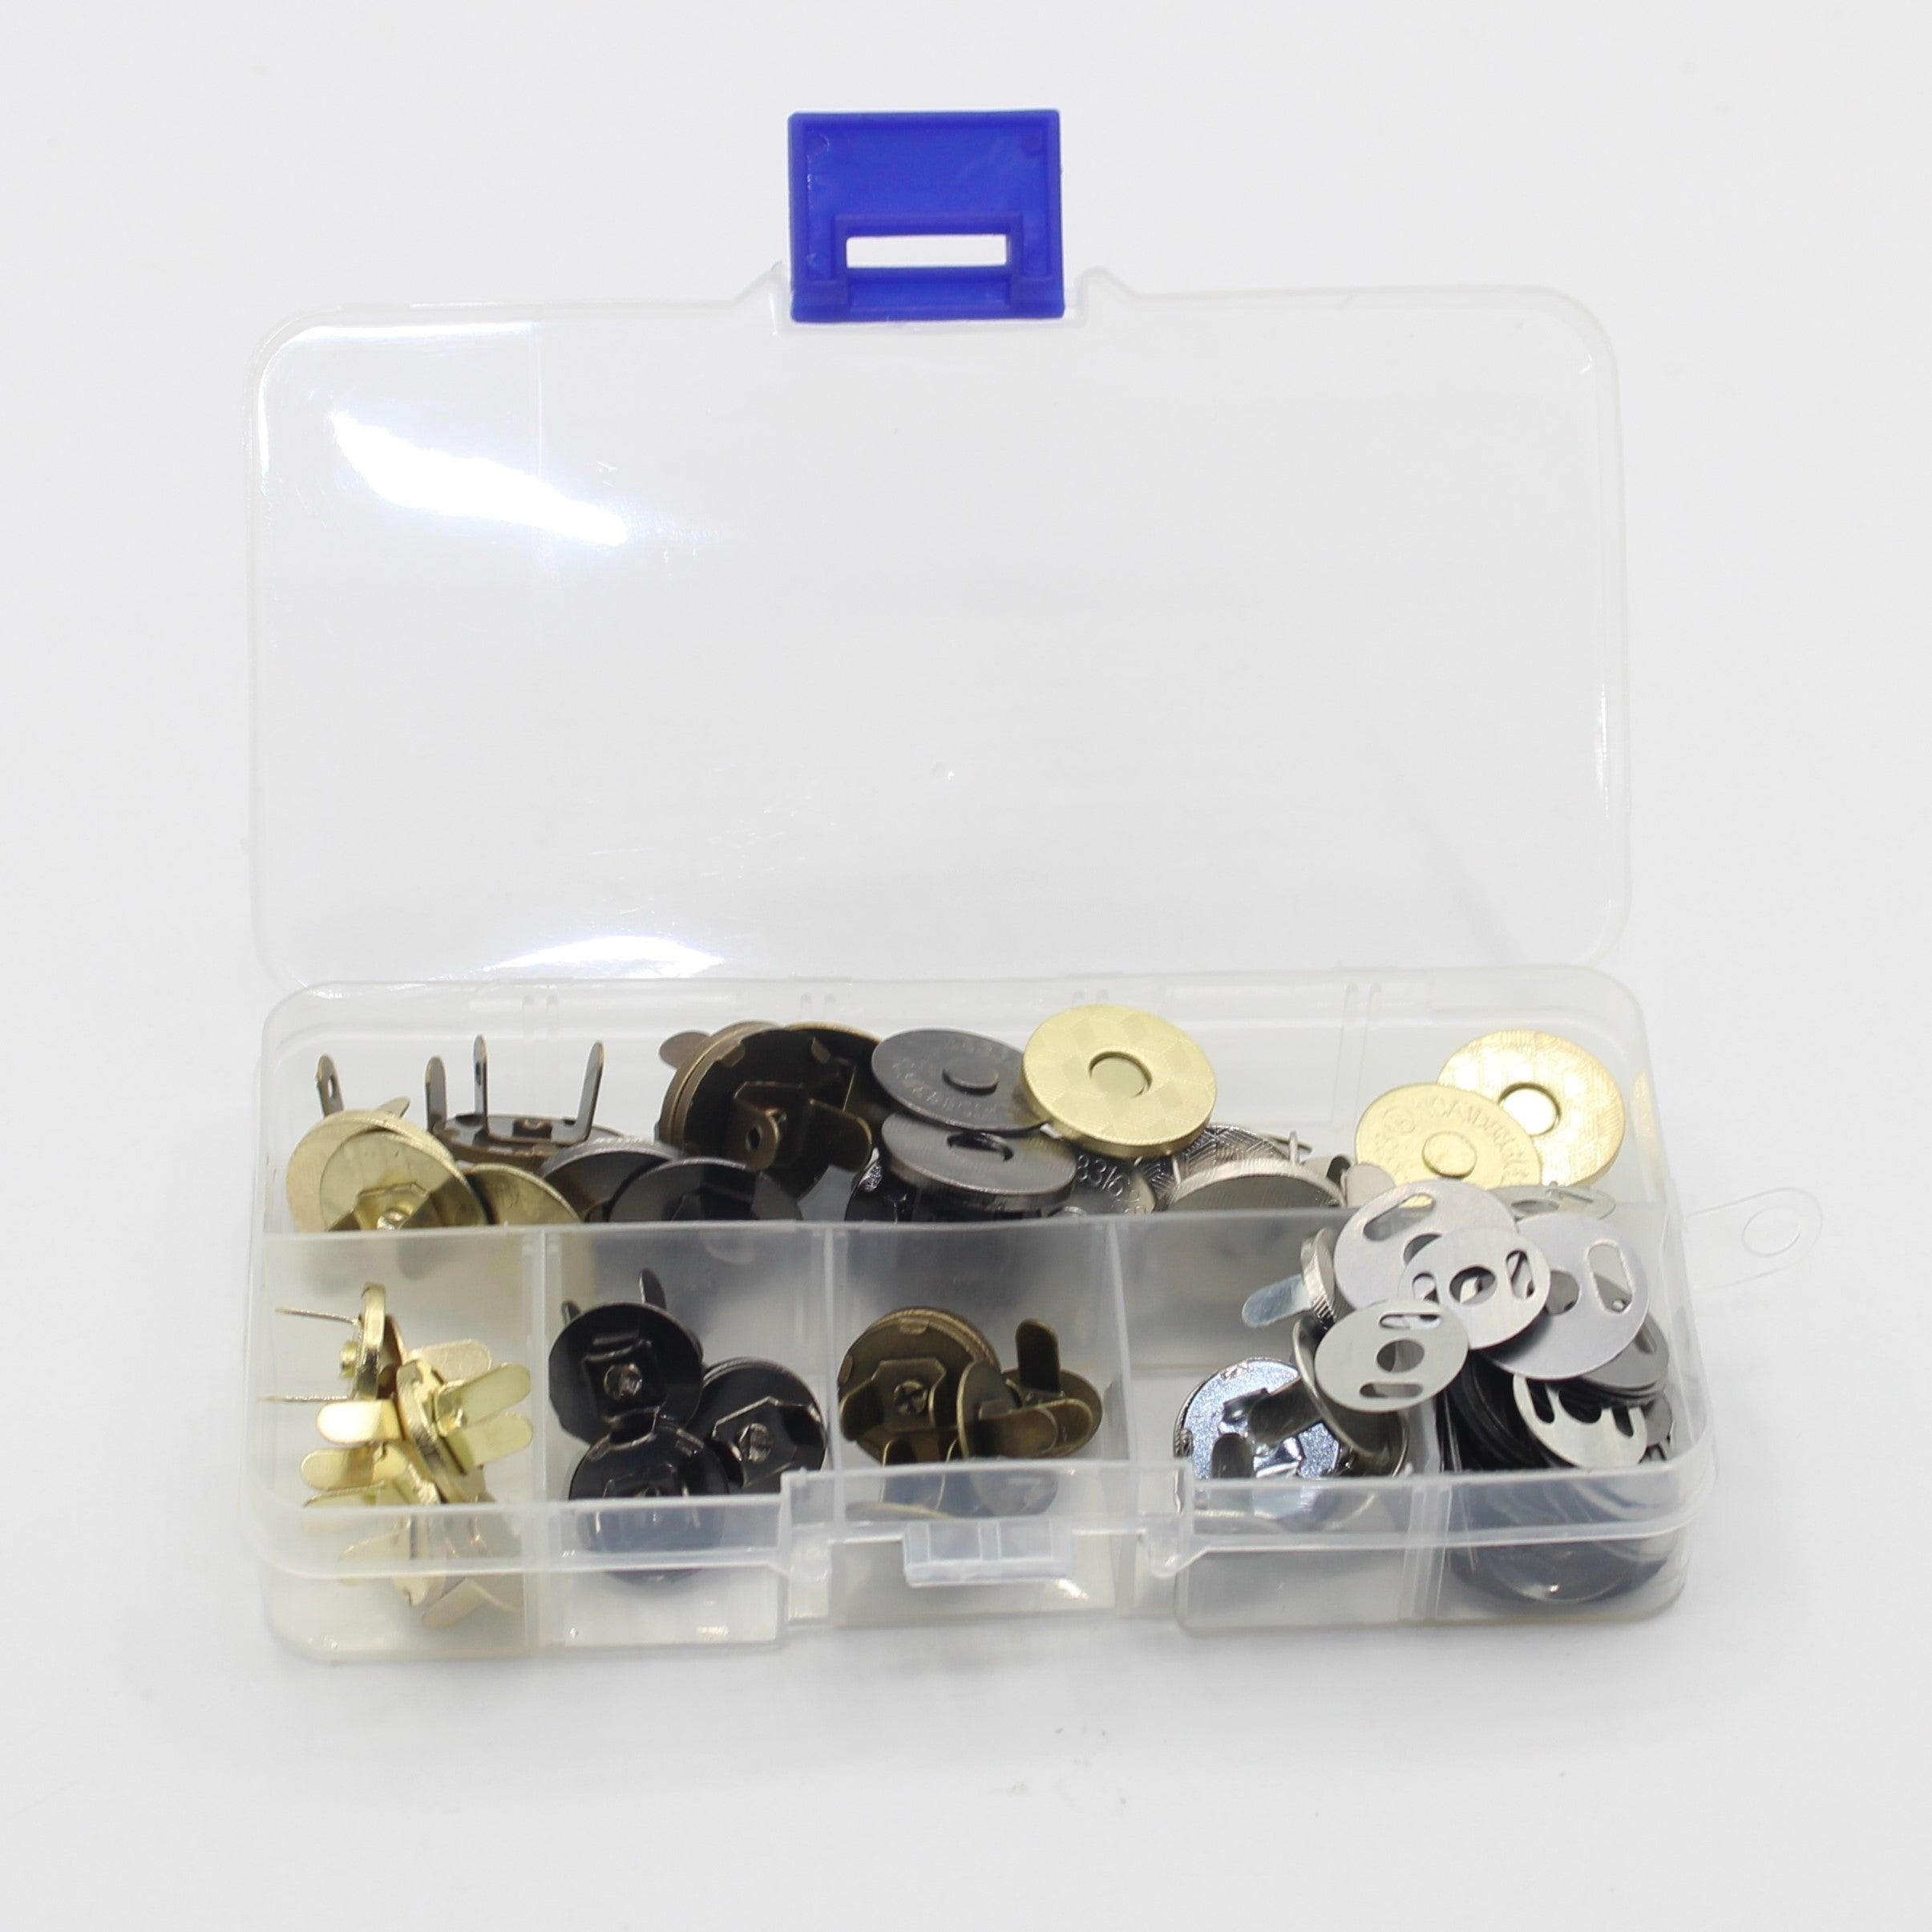 24 sets of Magnet Snap Buttons - 10 and 14mm - ACCESSOIRES LEDUC